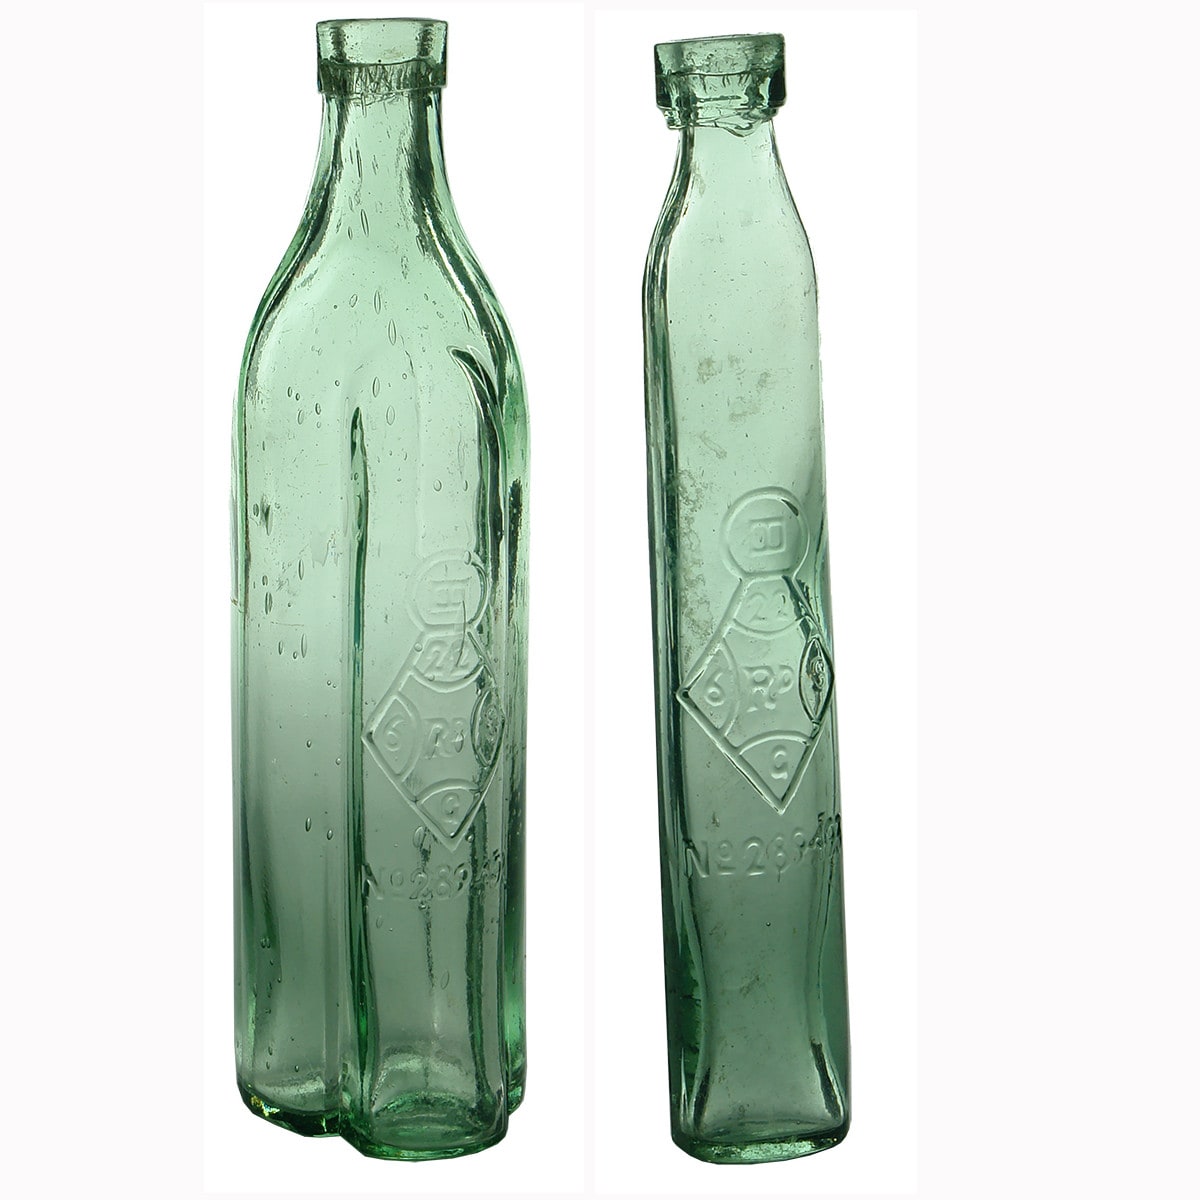 Goldfields. Registered double bottle, one thin and one larger bottle with convex side that thin bottle slots into.  Aqua.